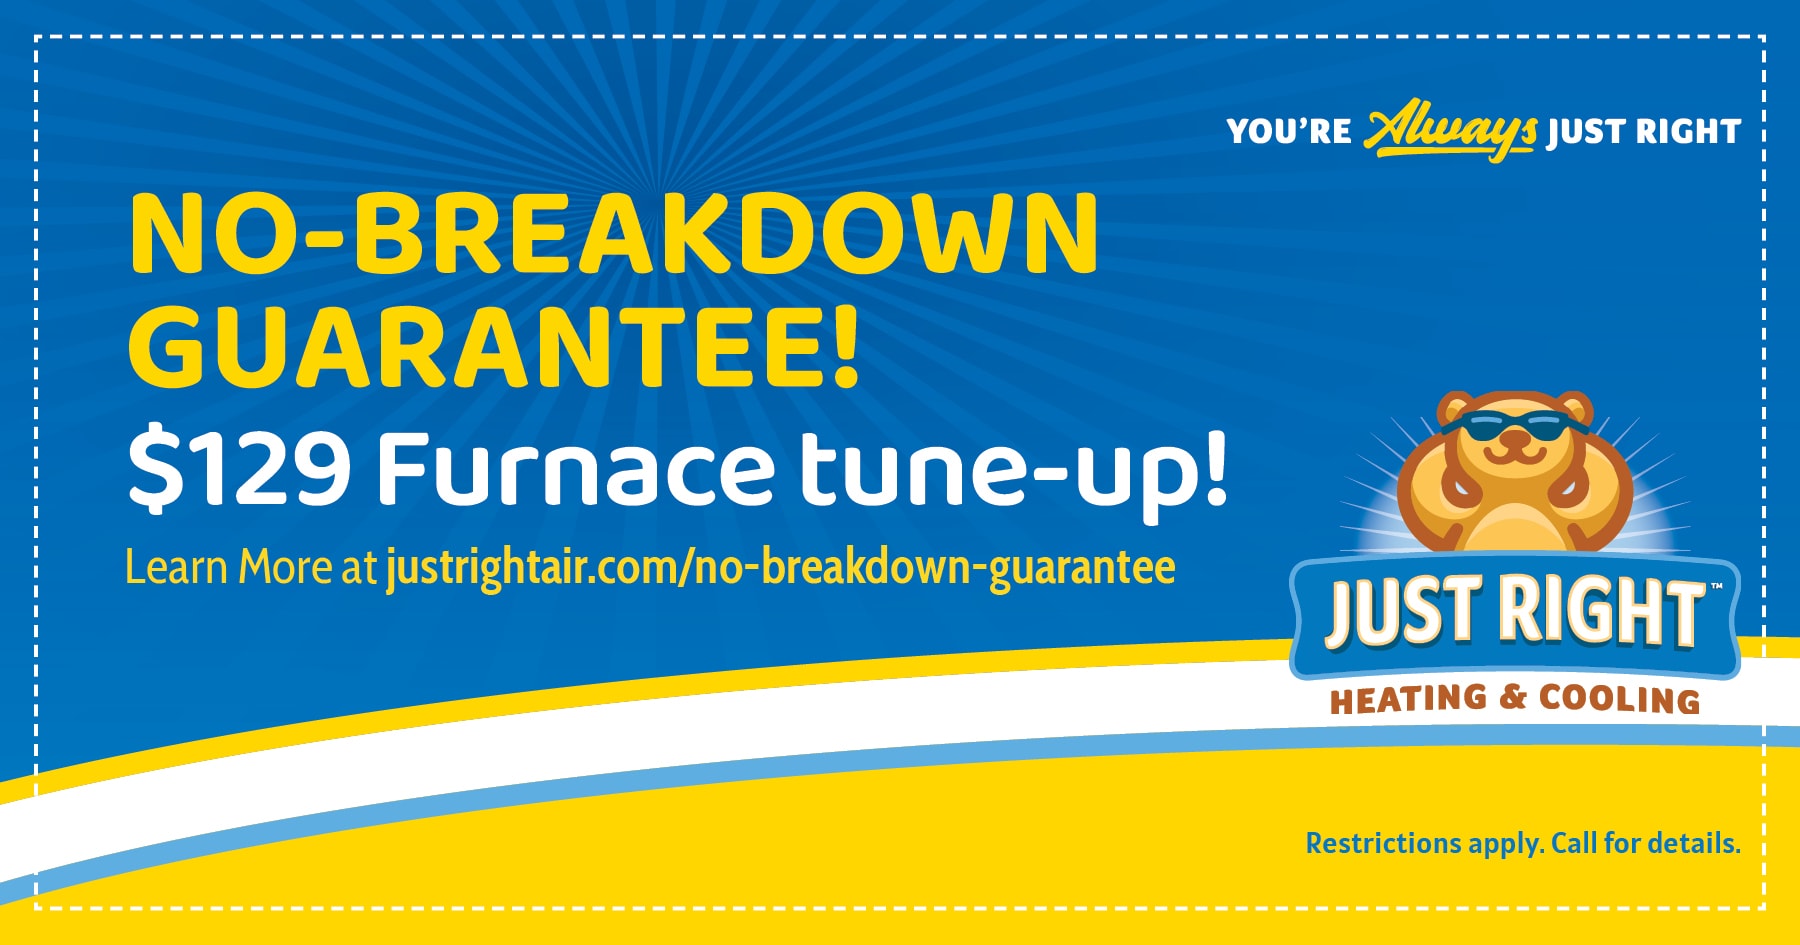 $129 Furnace tune-up with our No Breakdown Guarantee.